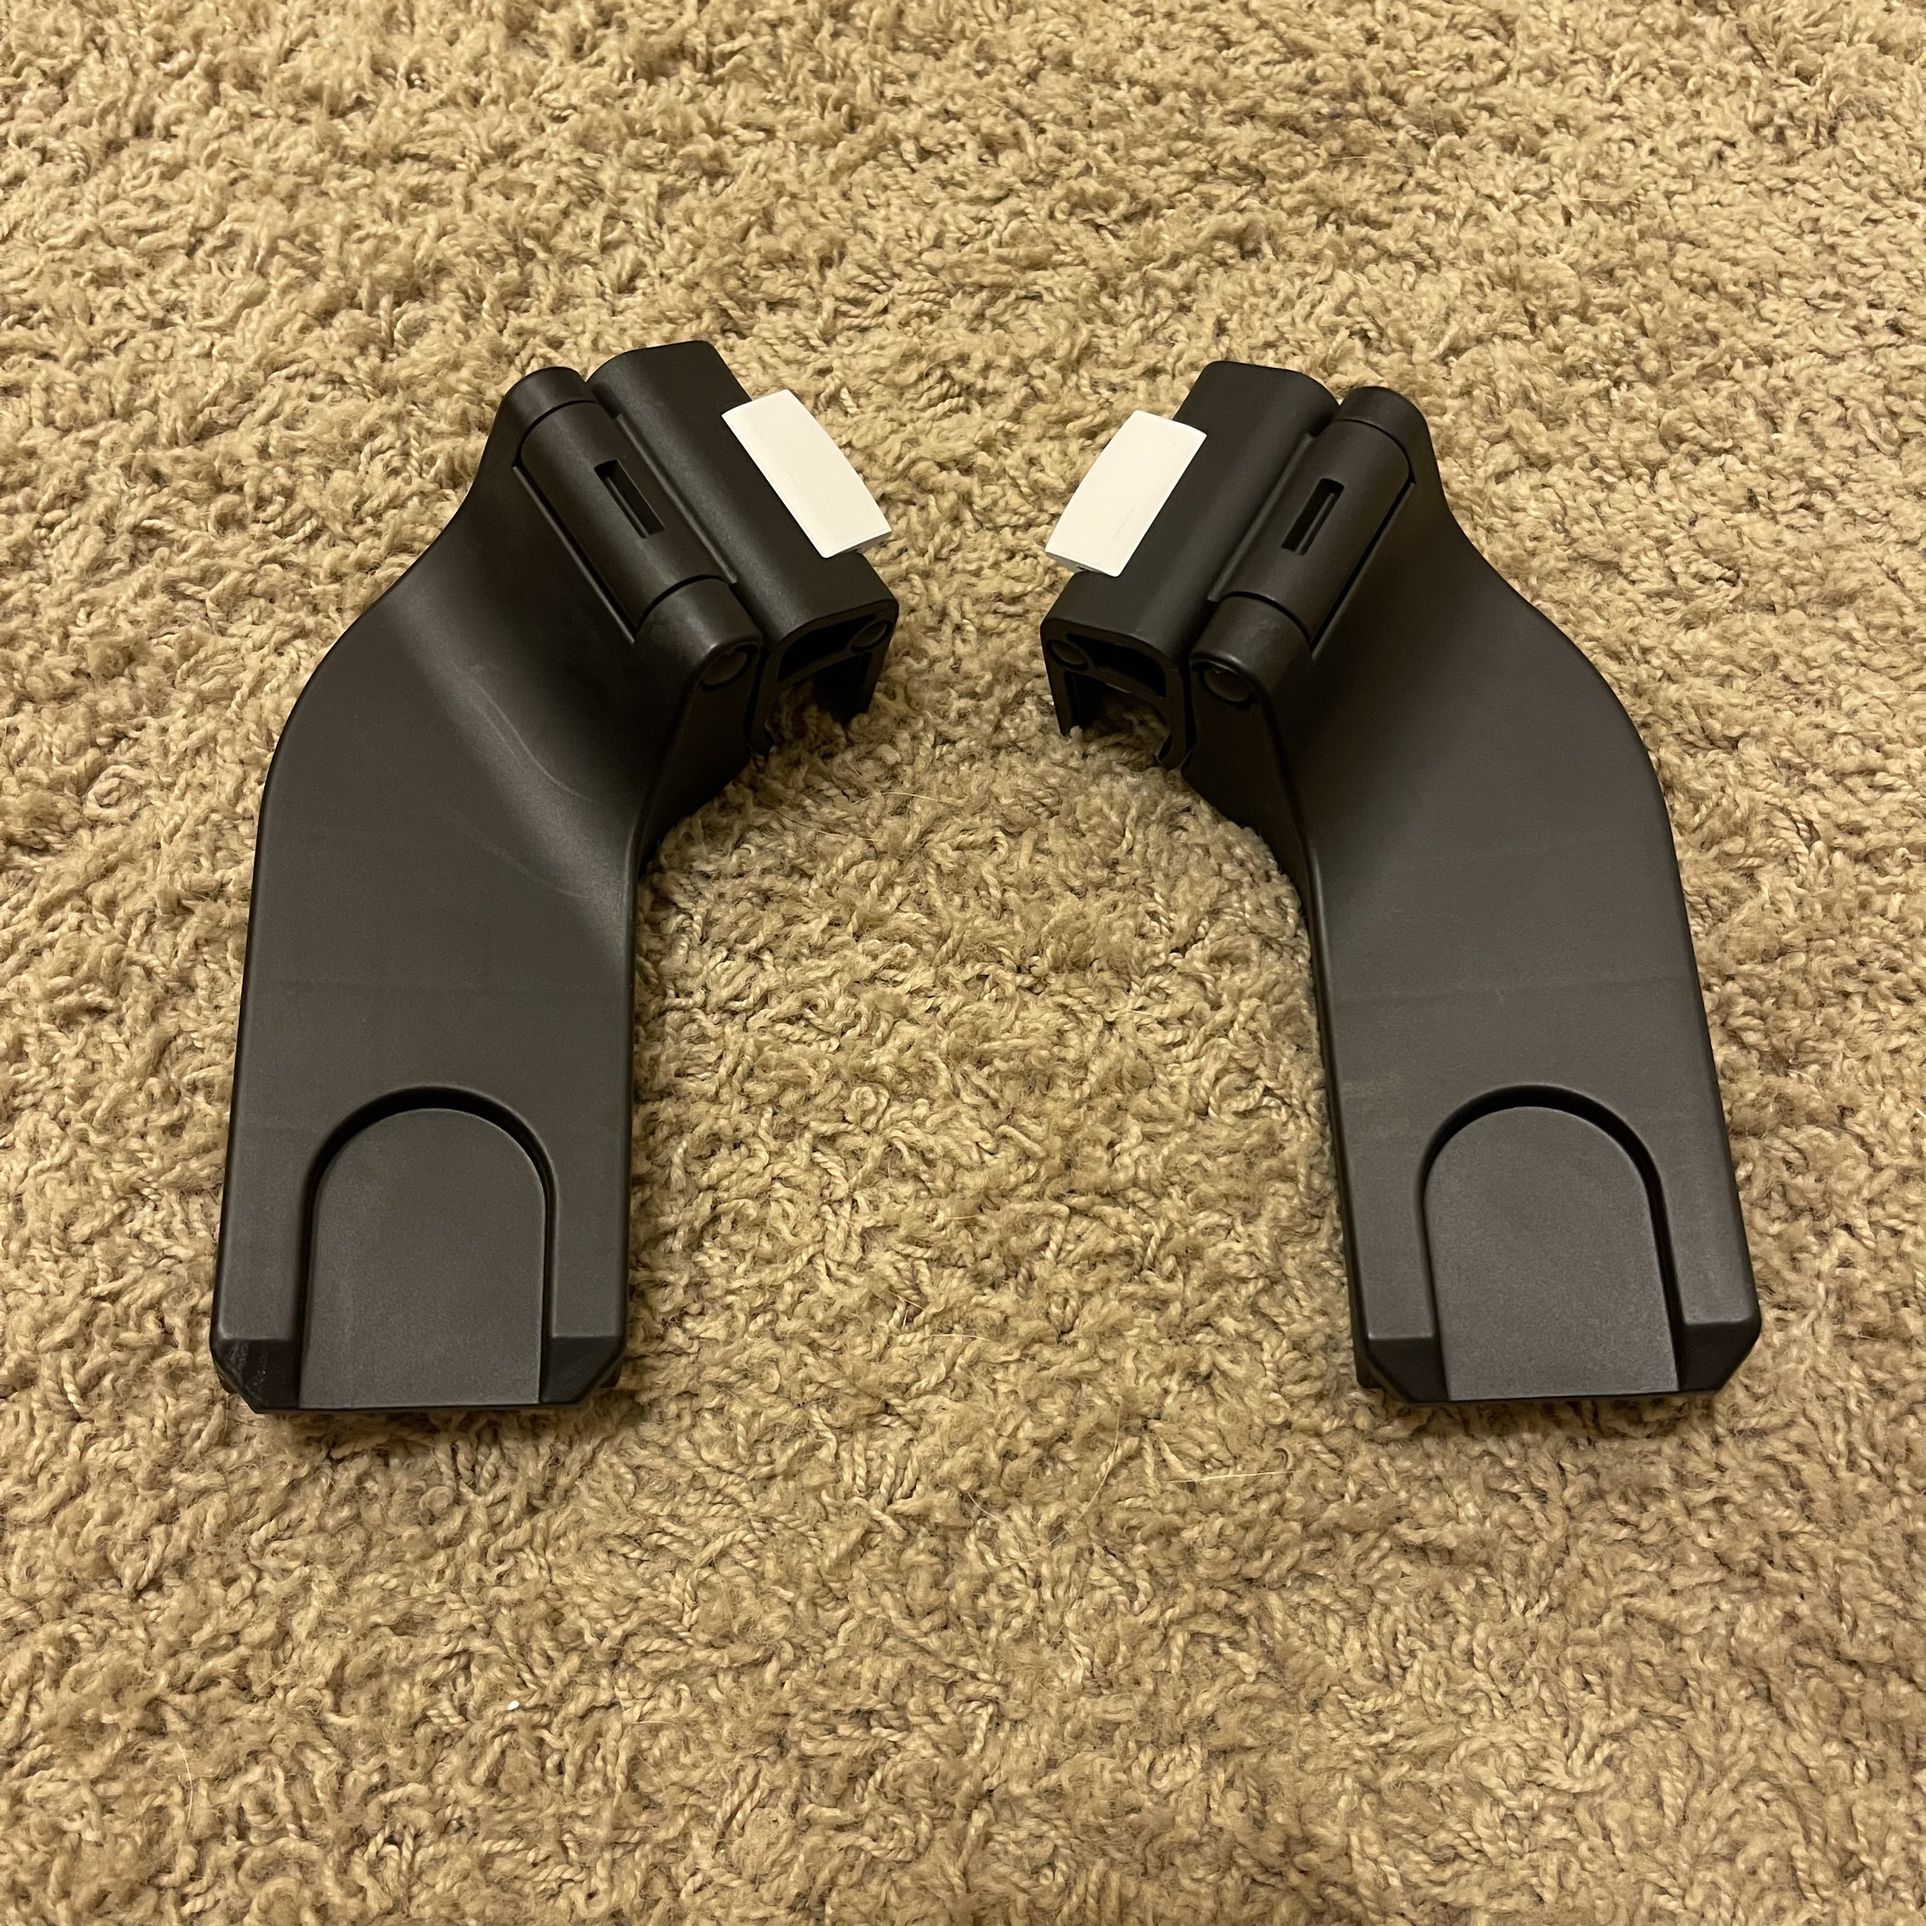 GB Pockit+ Plus Car Seat Adapter carseat adapters